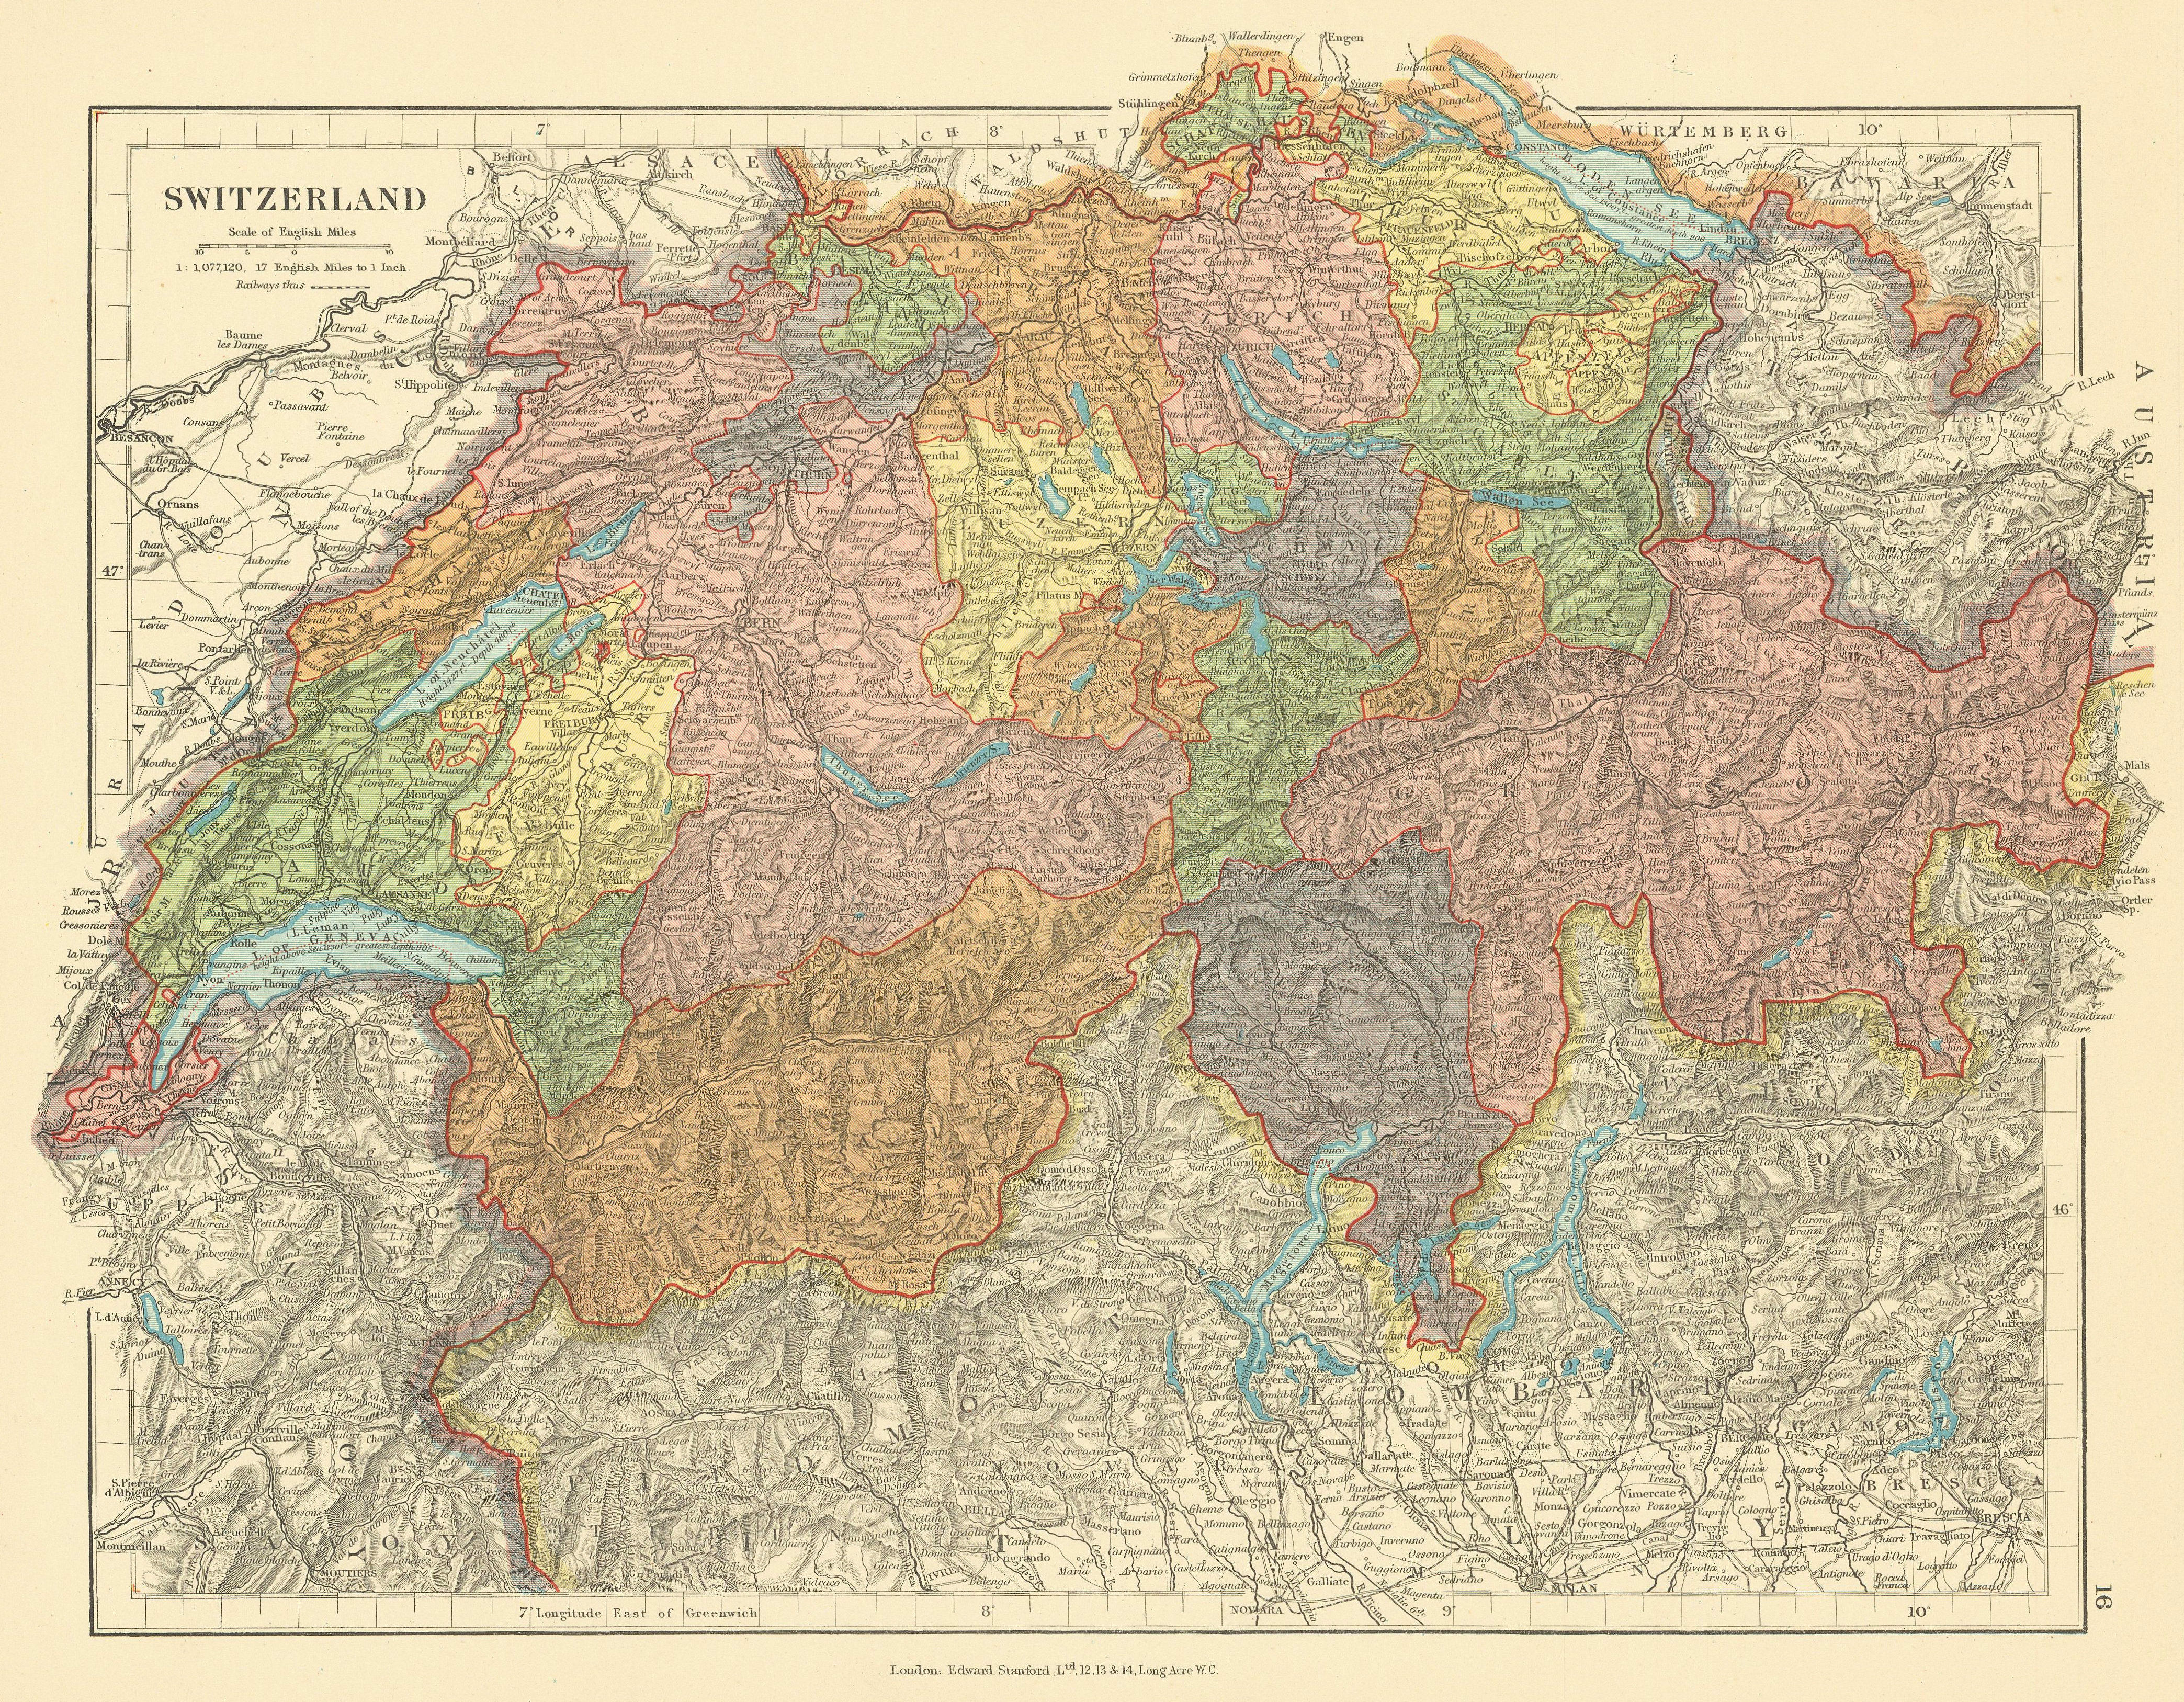 Associate Product Switzerland in cantons. Italian Lakes. STANFORD c1925 old vintage map chart